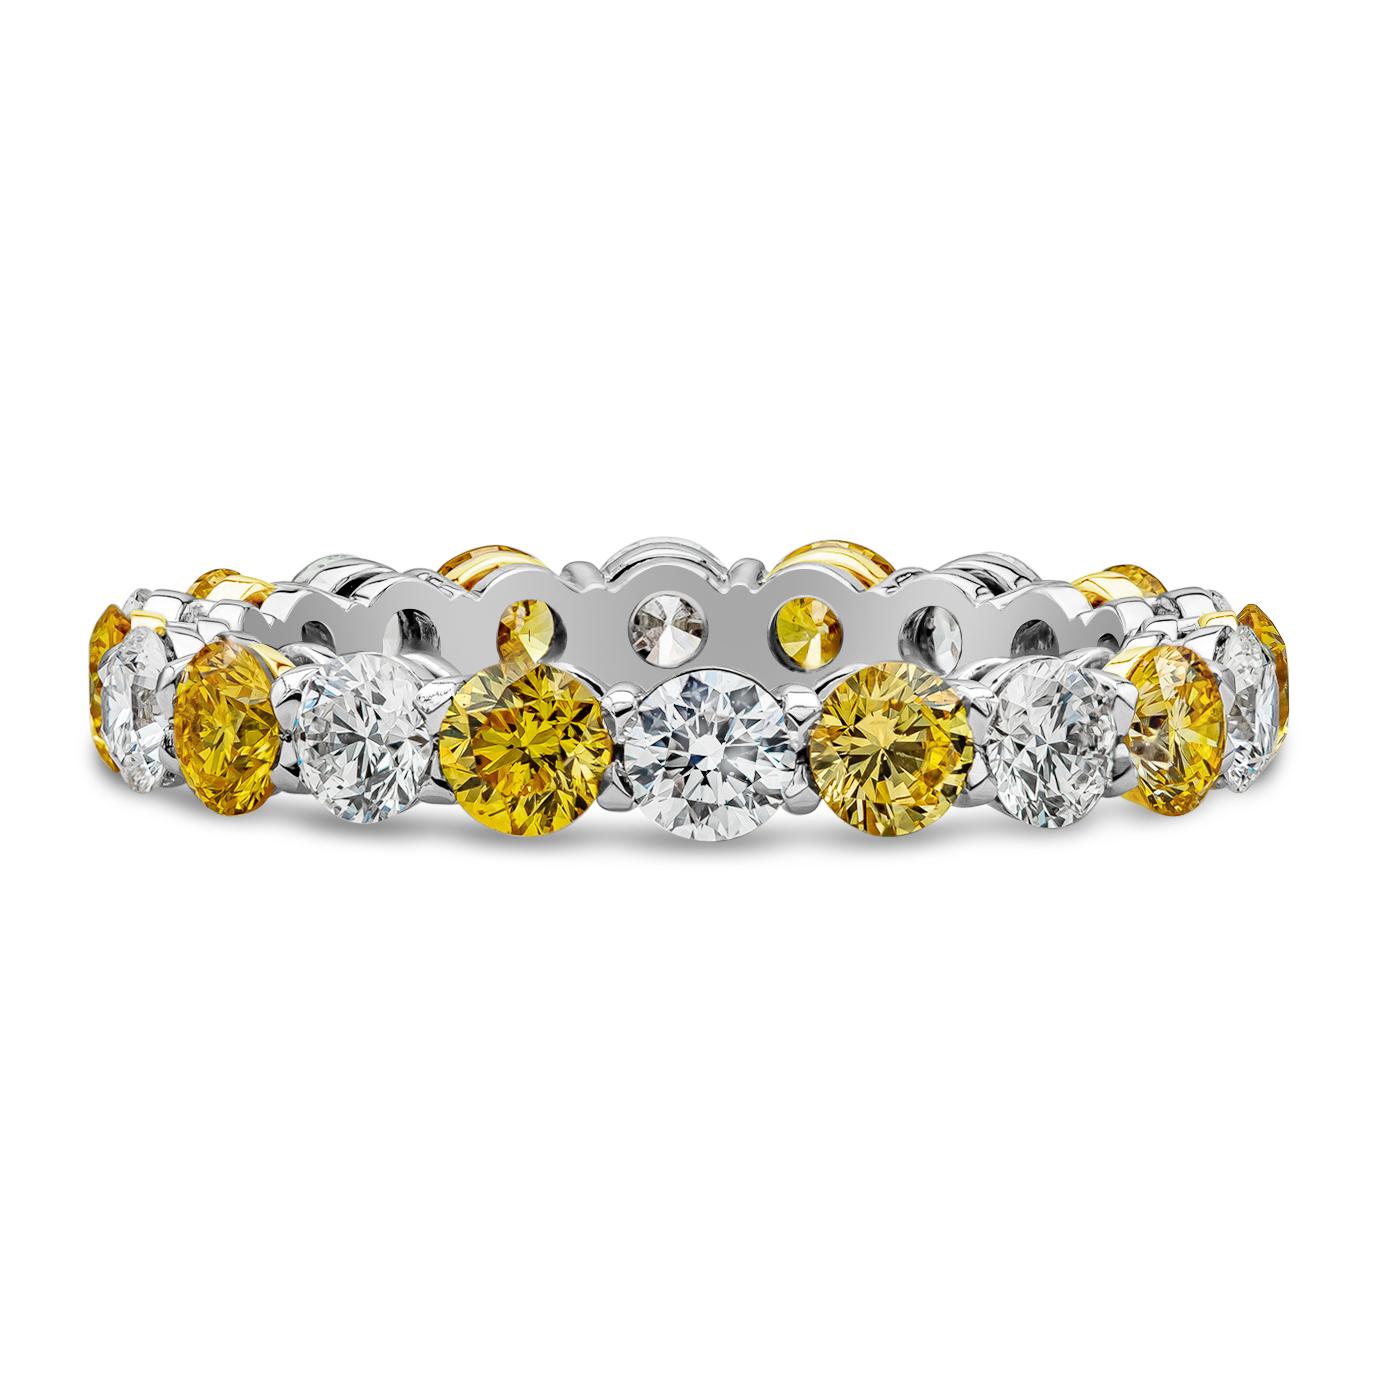 A fashionable eternity wedding band that can complement an engagement ring, or used as a stand-alone piece. Showcasing Fancy Vivid Yellow diamonds weighing 1.33 carats total, VS-Si in Clarity. Alternating with round brilliant white diamonds weighing